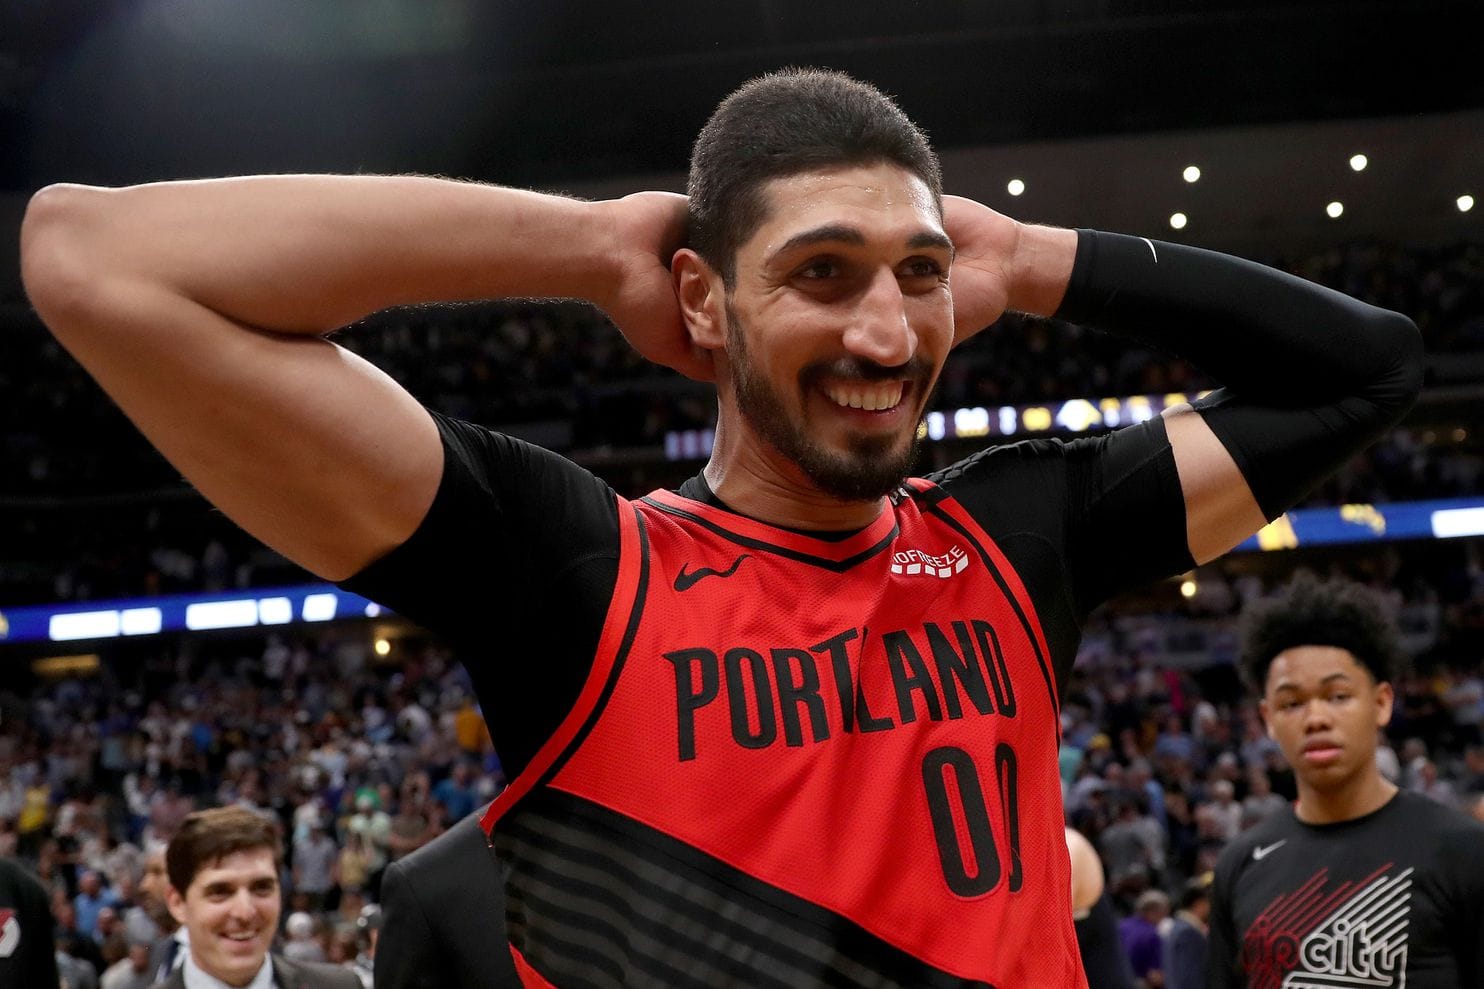 Turkish TV won’t air Enes Kanter’s NBA playoff games. He says government is ‘afraid’ of him 1